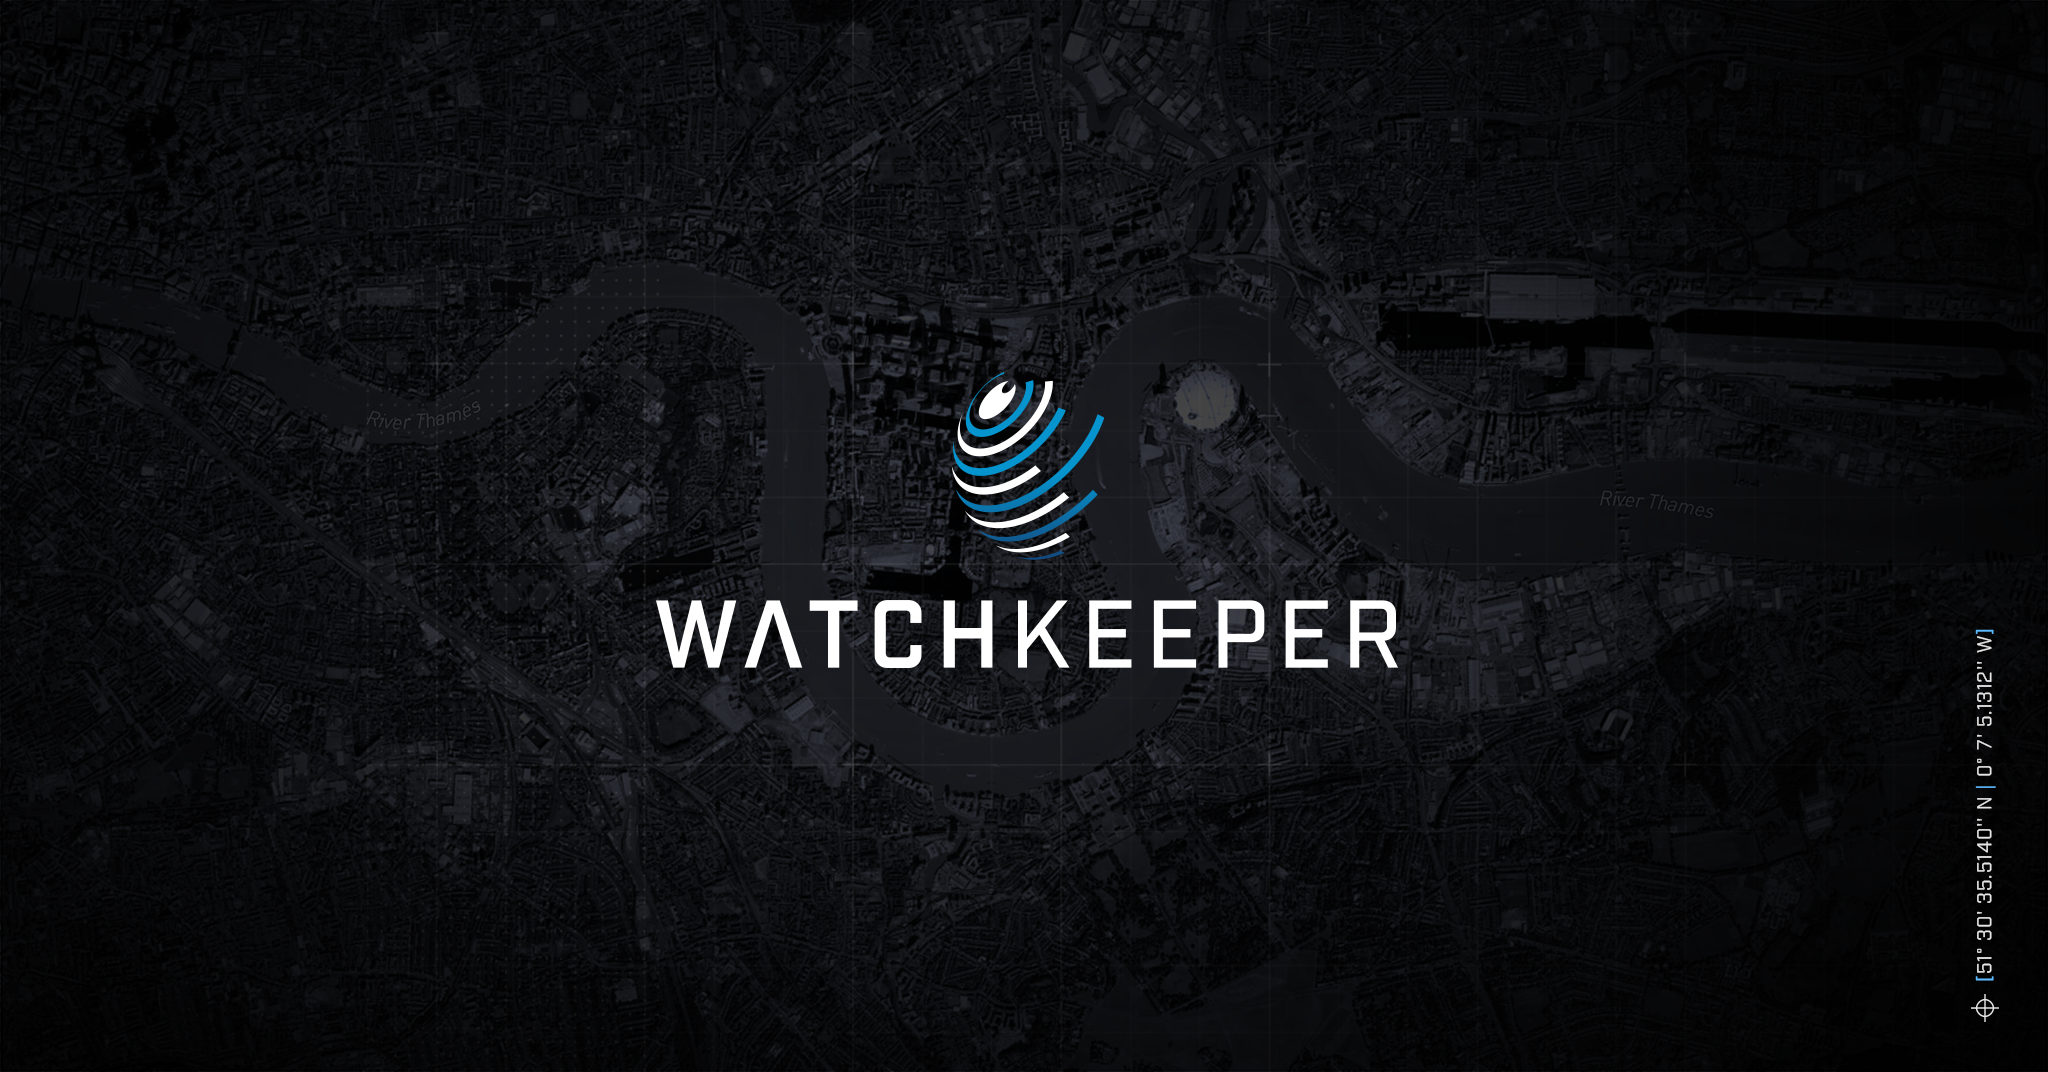 Find pricing, reviews and other details about WatchKeeper